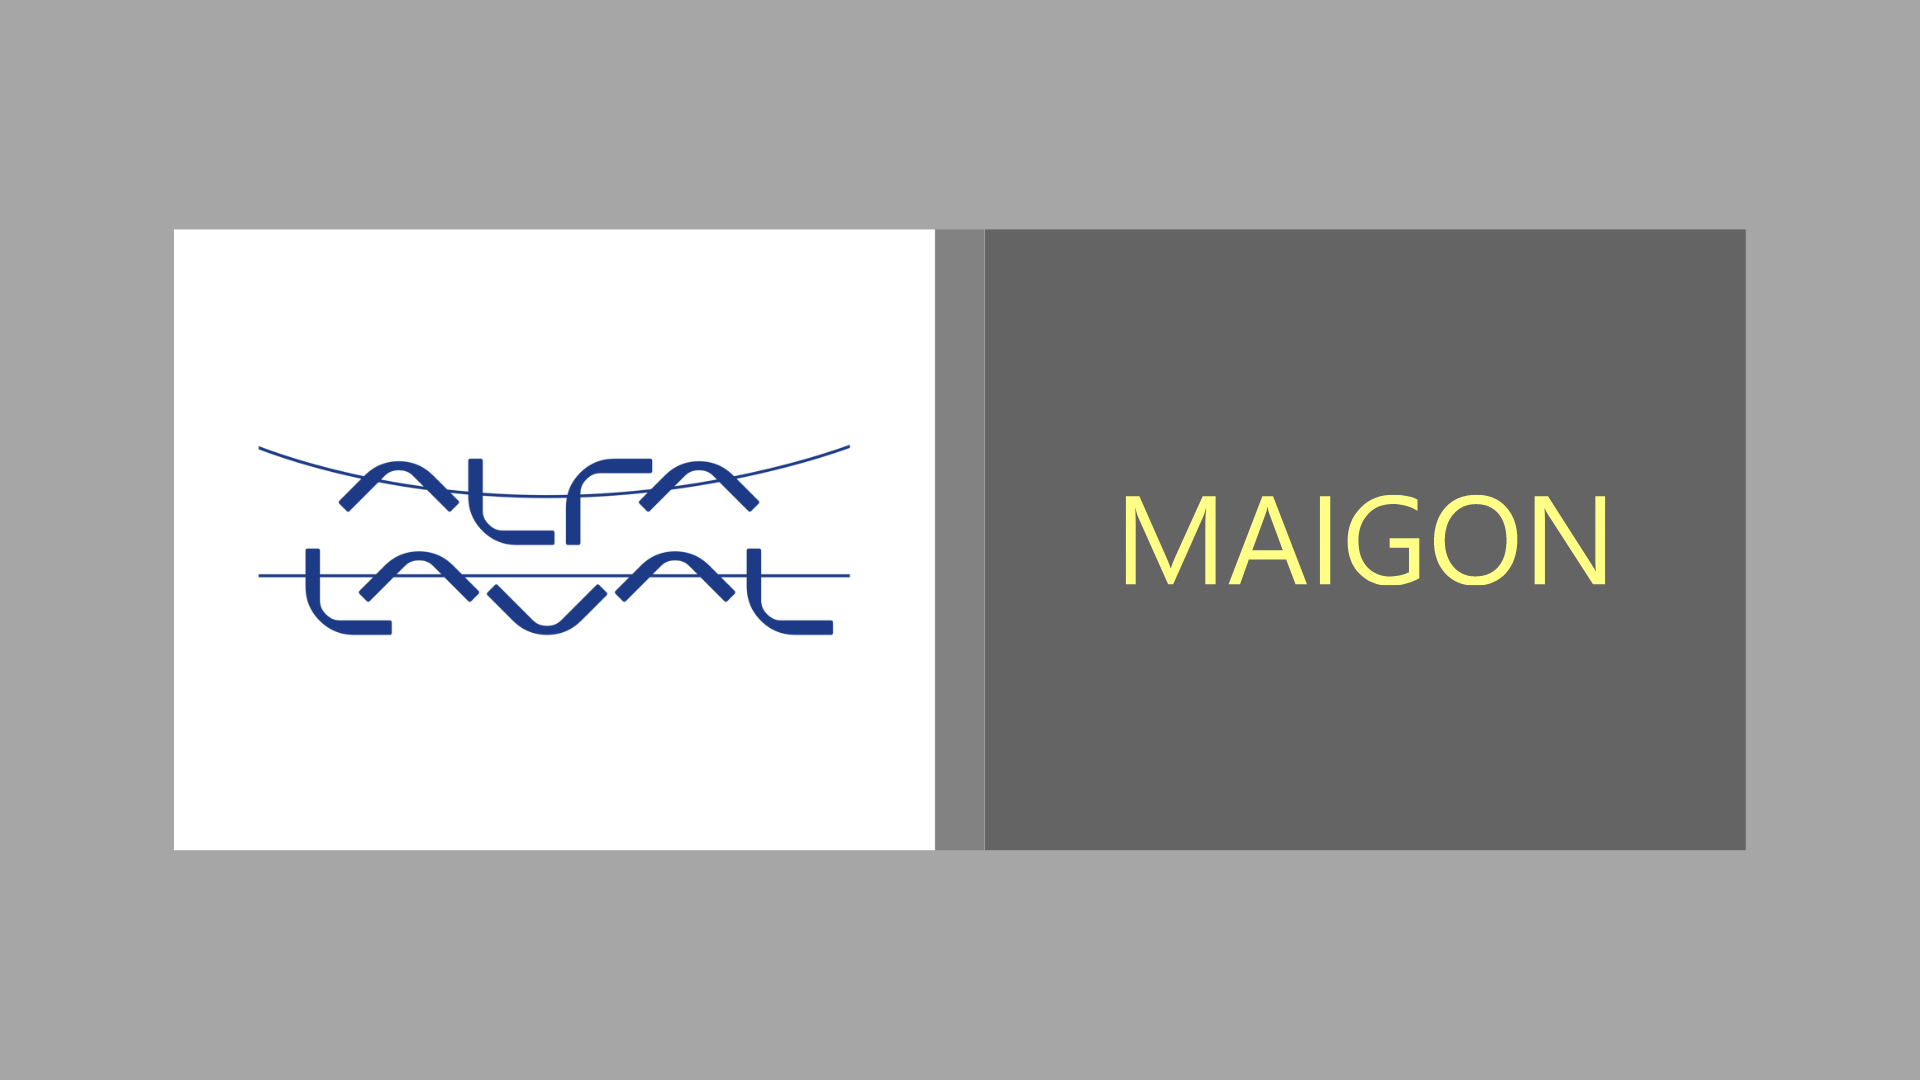 Maigon delivers customized NDA review tool for Alfa Laval